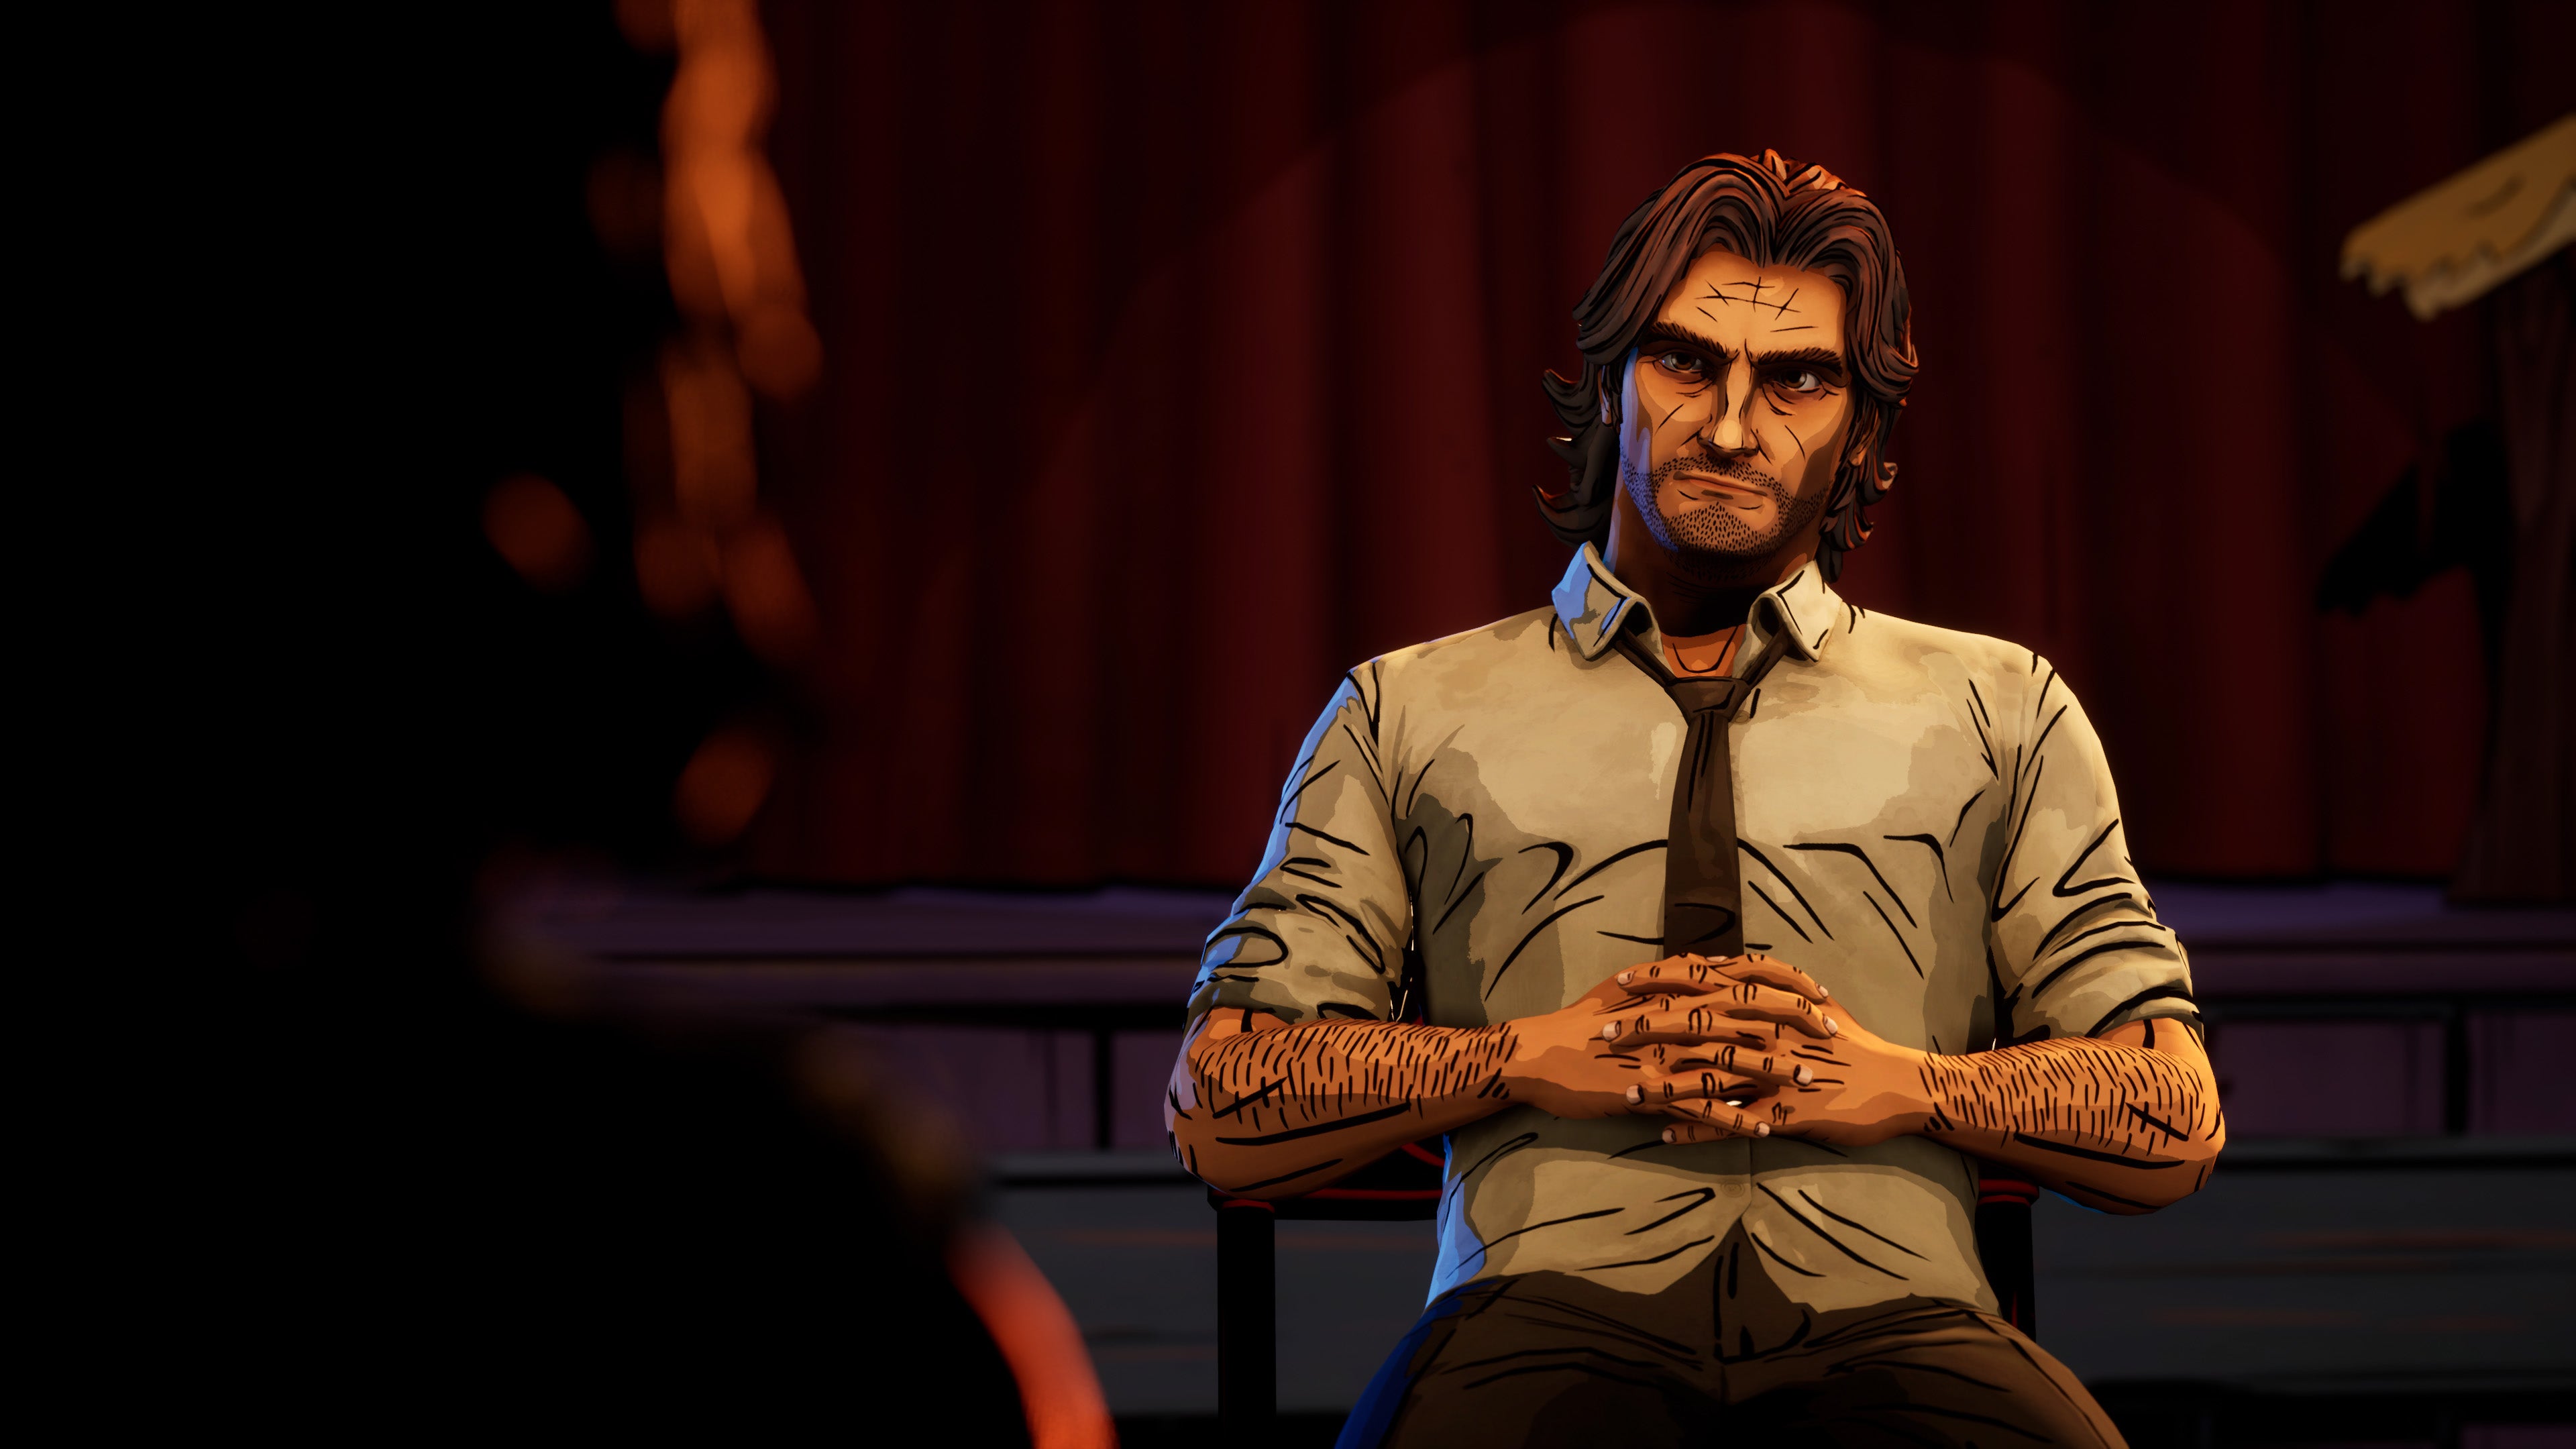 Image for The Wolf Among Us 2: A Telltale Series is heading to PC and consoles in 2023